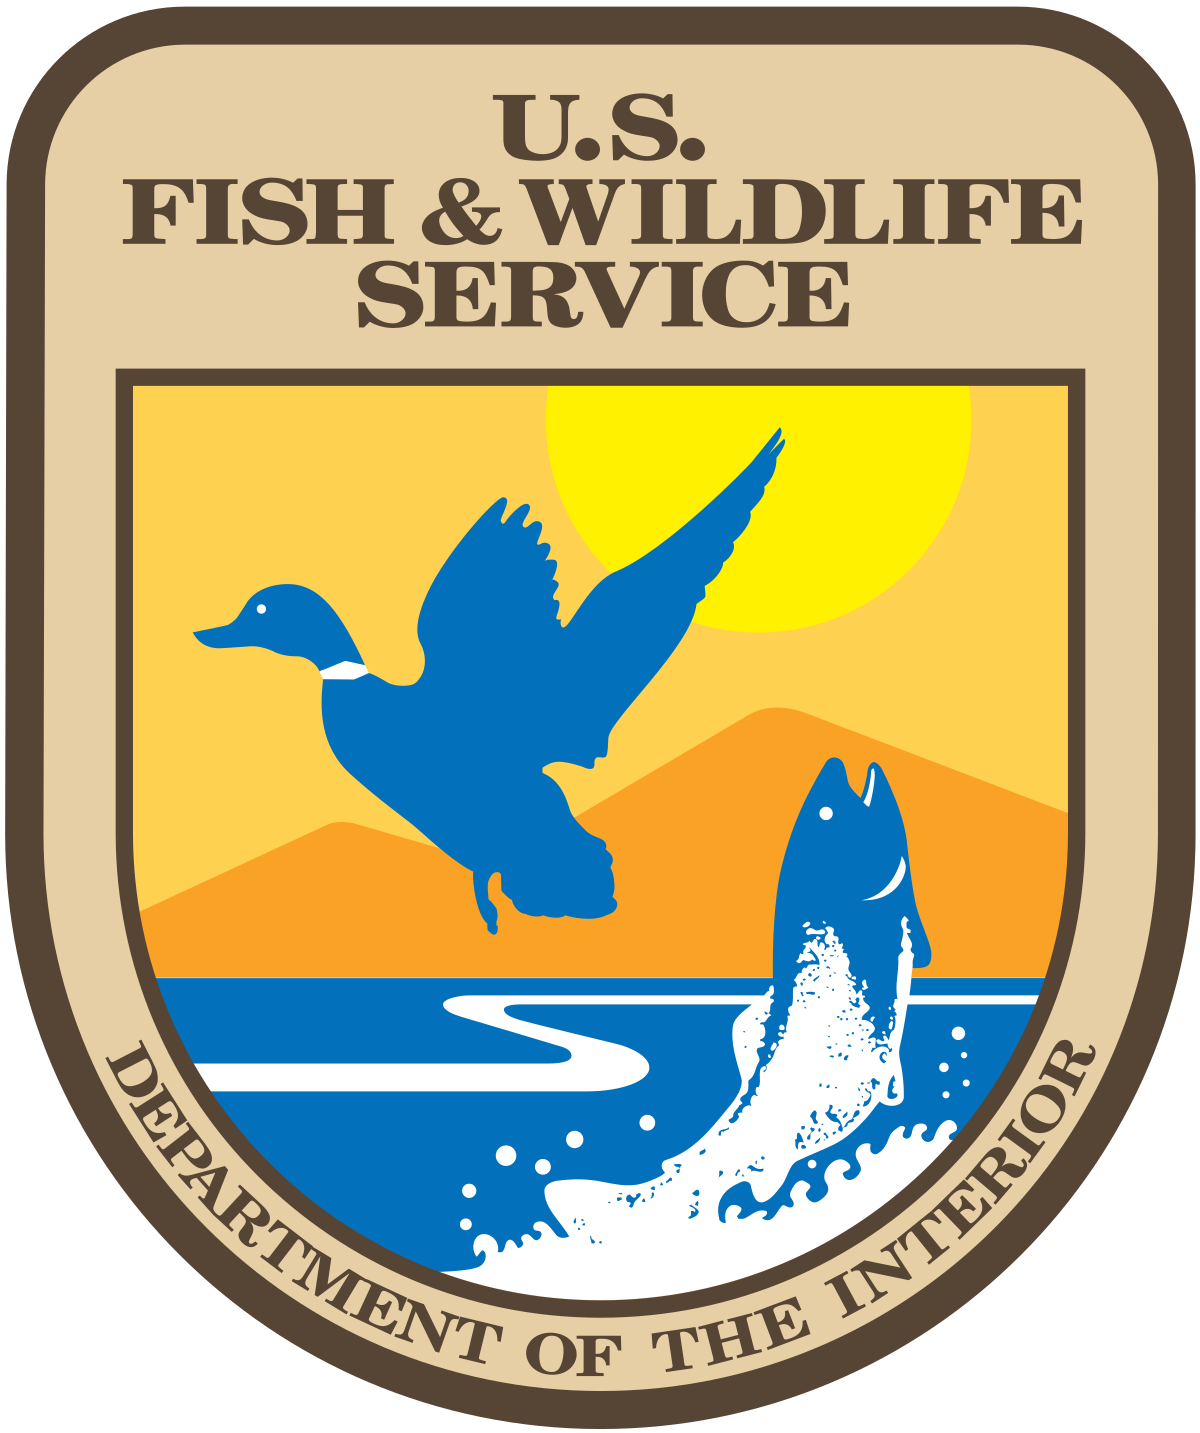 Fish and Wildlife Service logo with link to web site